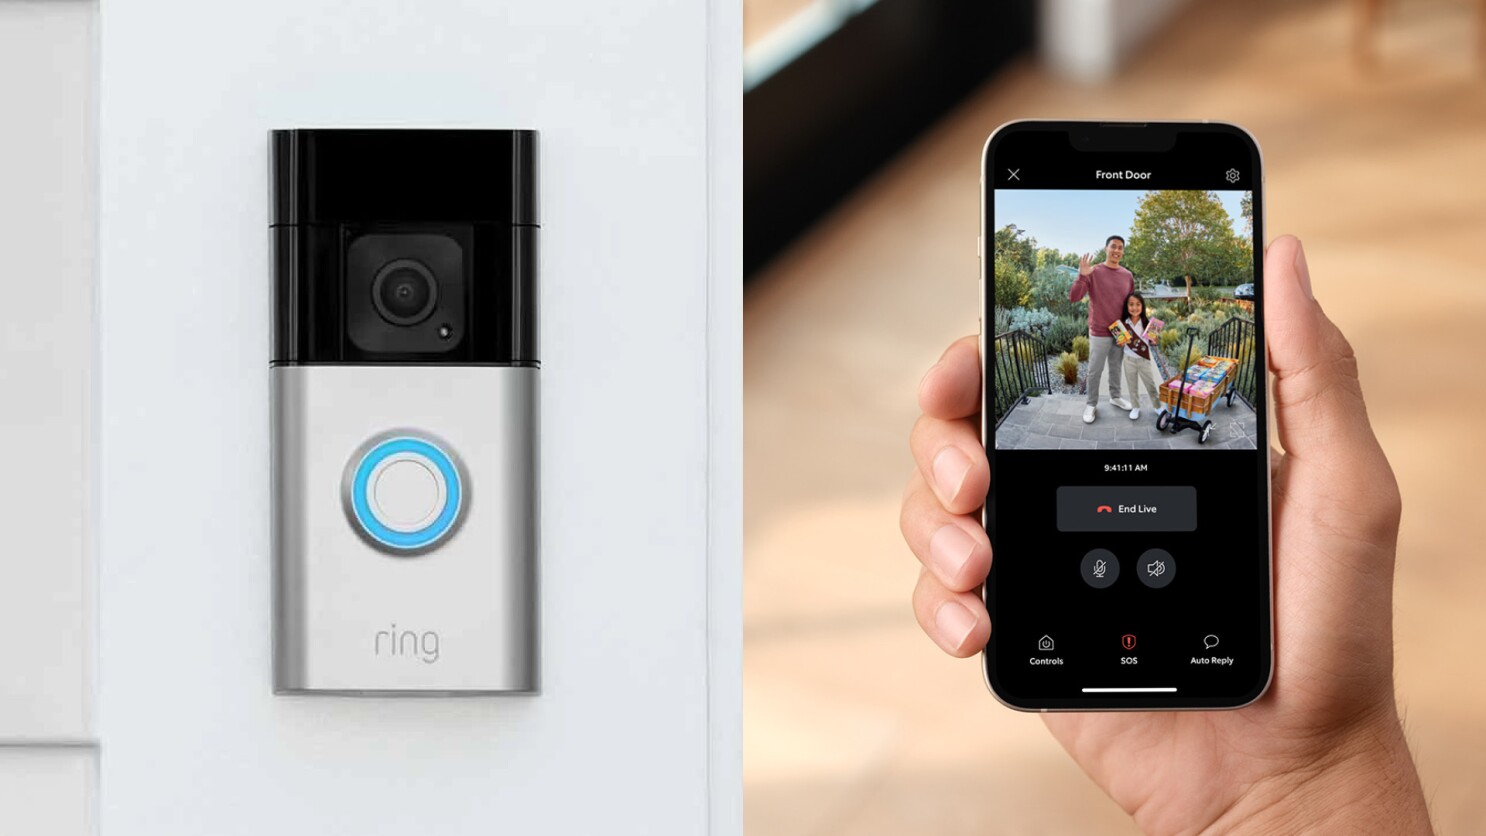 How Does The Ring Video Doorbell Work